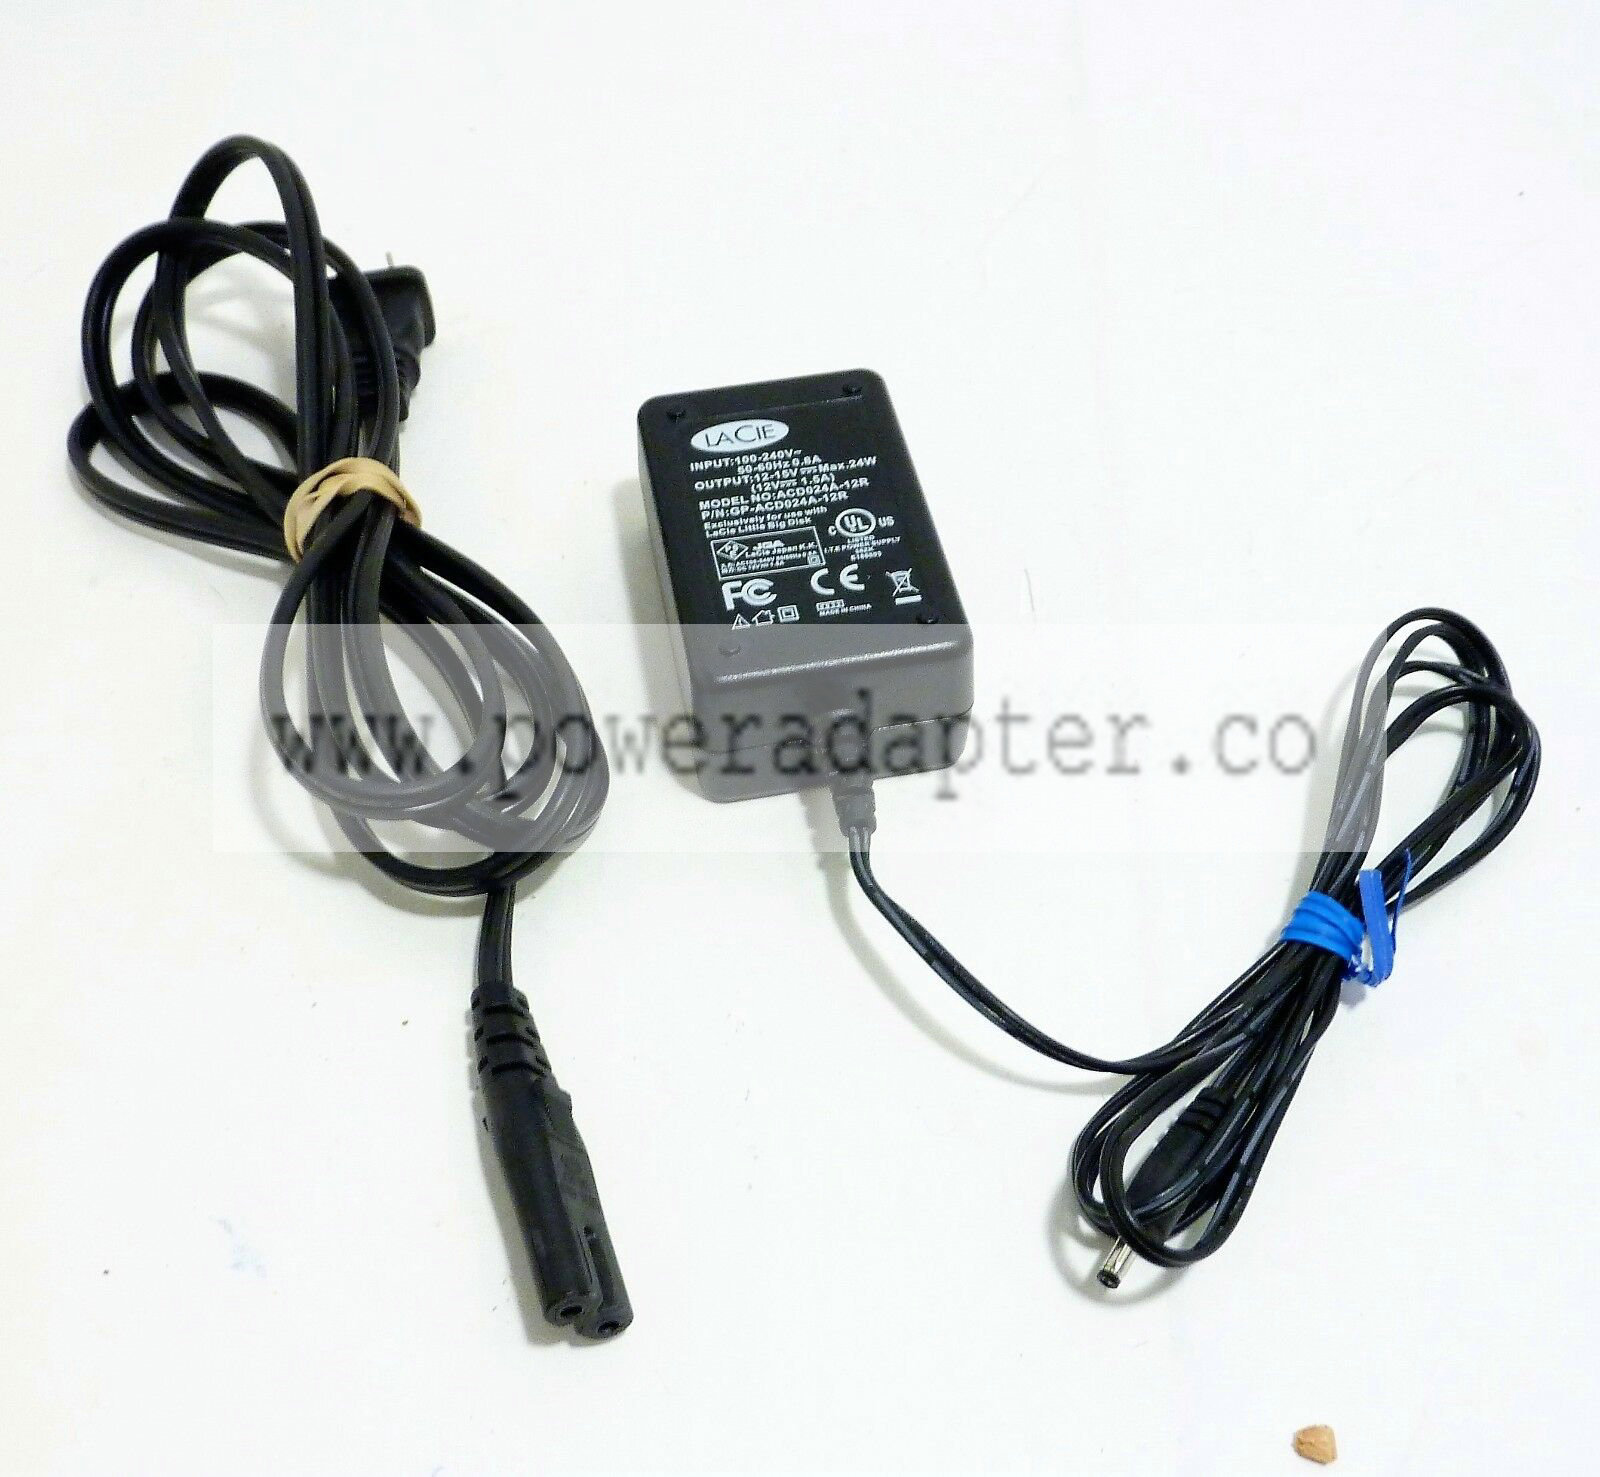 Original LaCie Little Big Disk Drive Power Supply Adapter ACD024A12R Model: ACD024A-12R Brand: LaCie Type: Power S